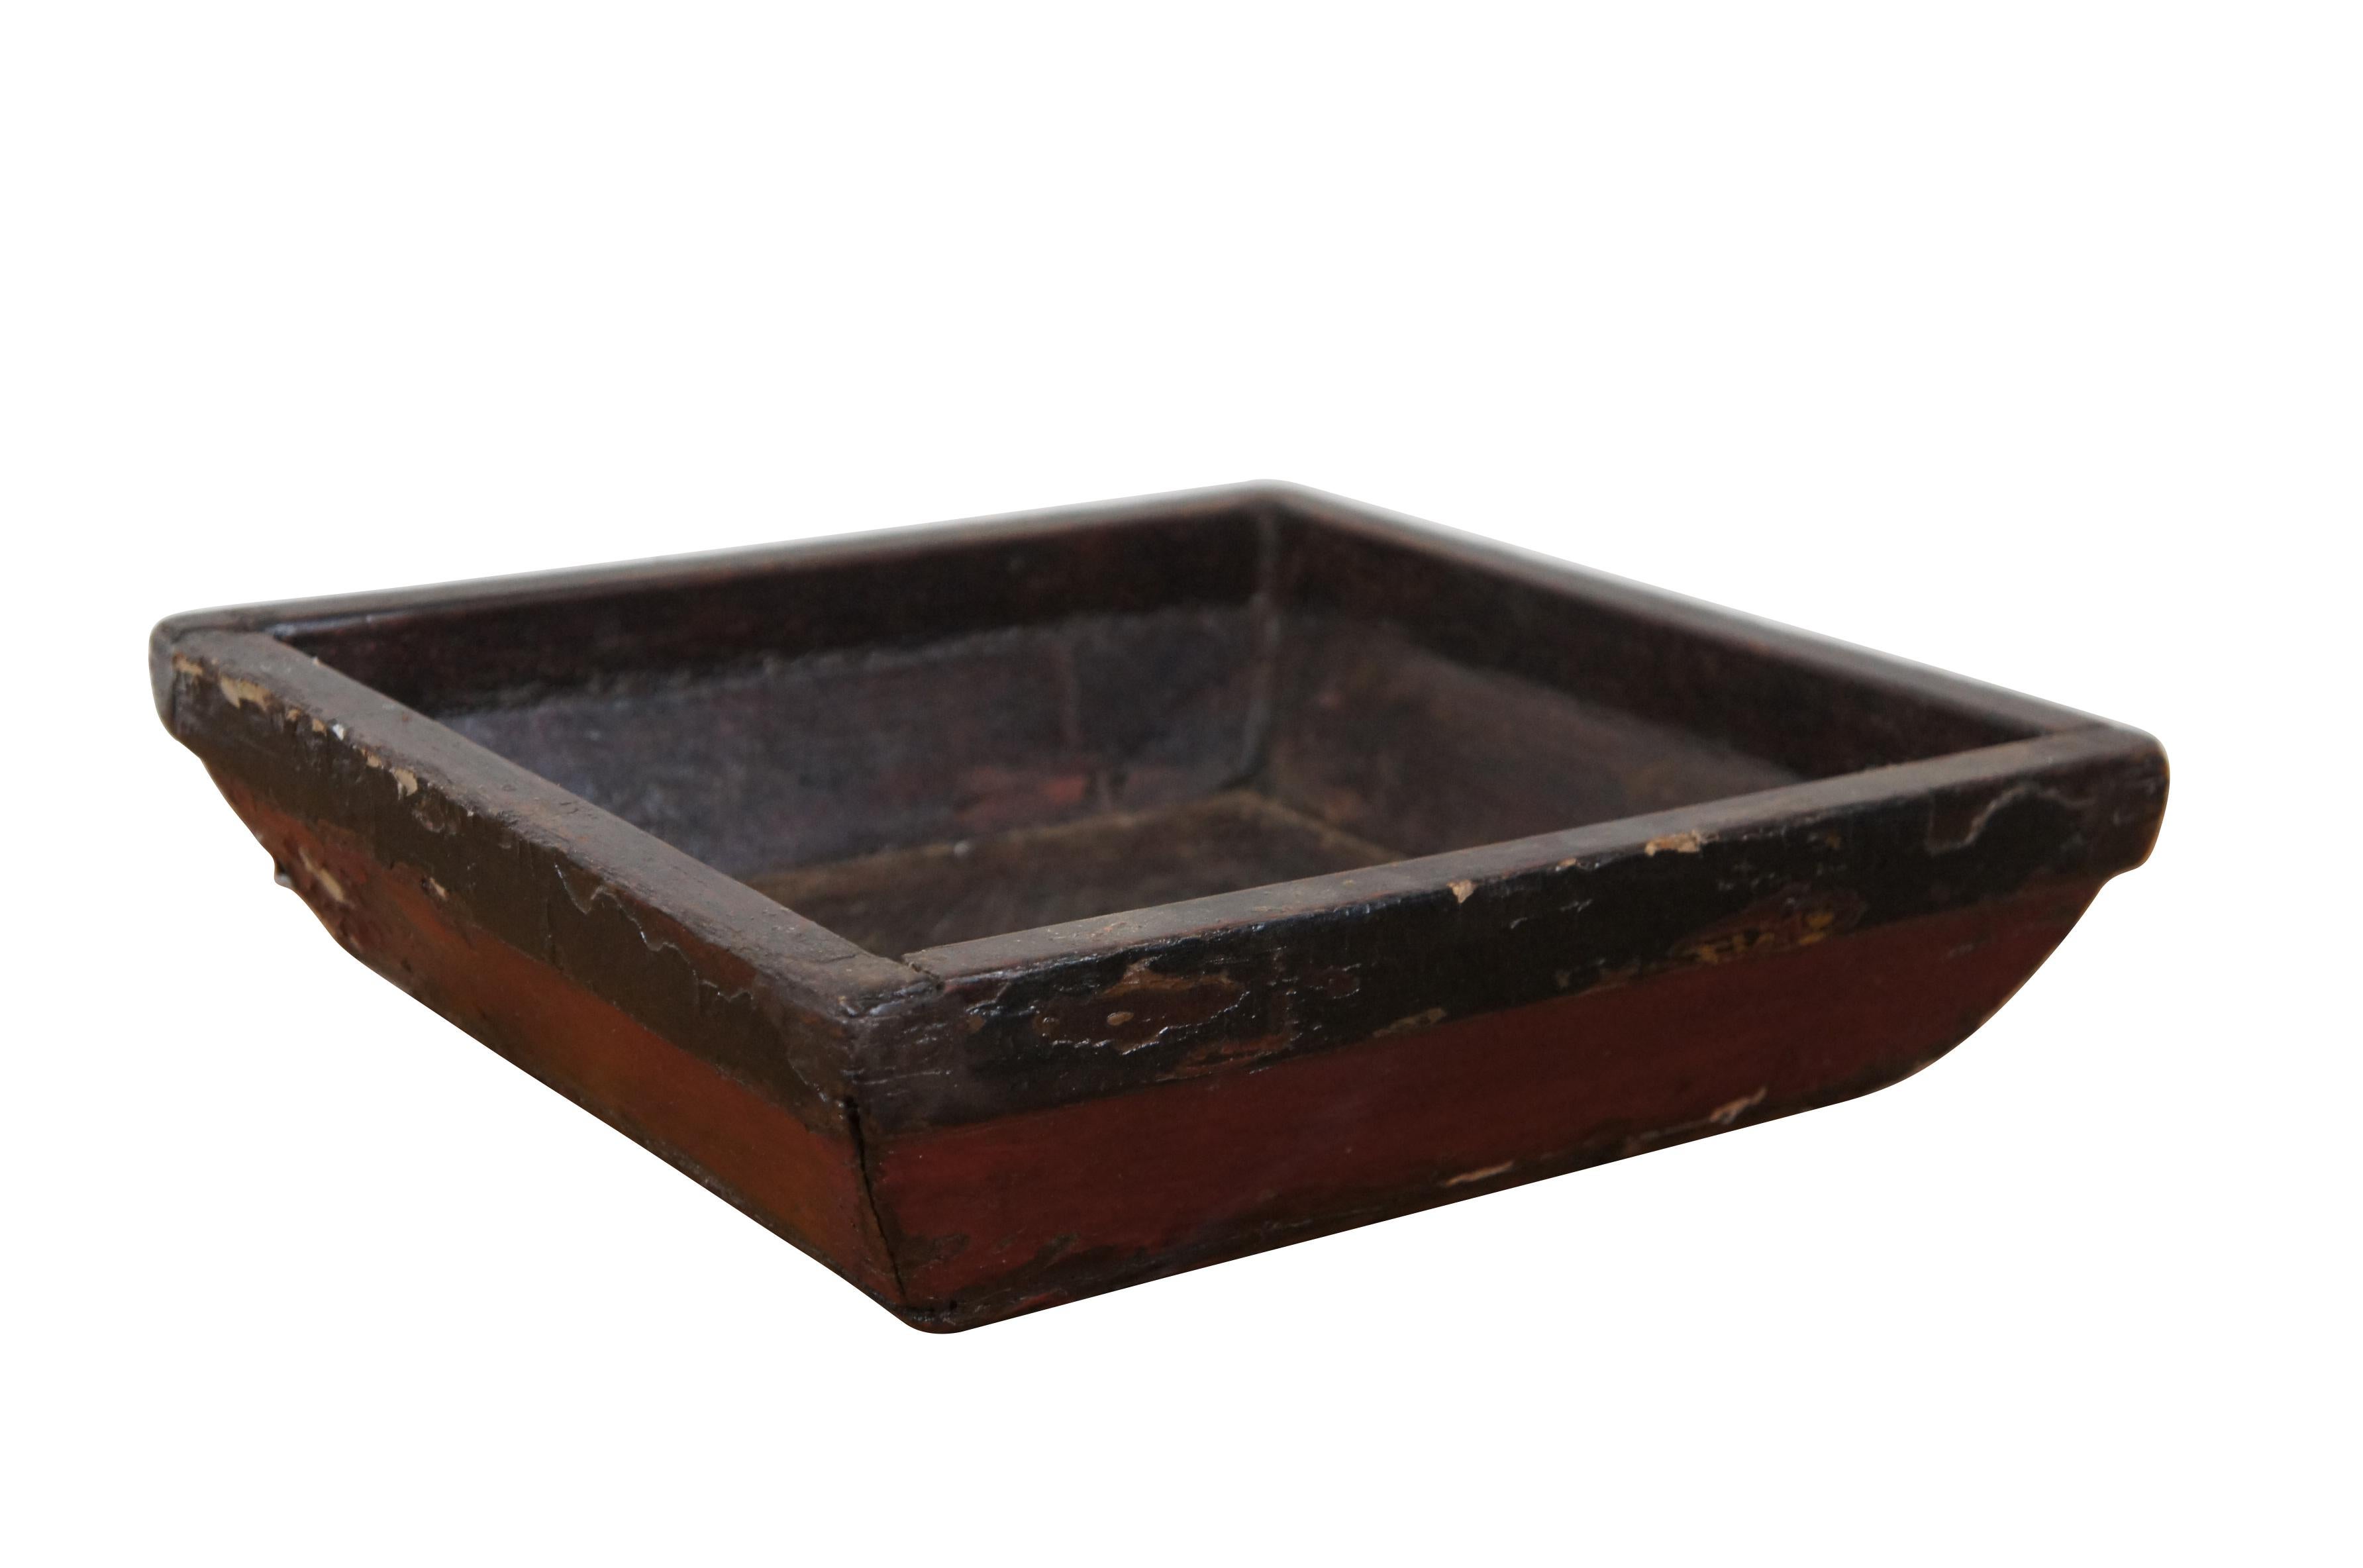 Antique Japanese square wooden serving bowl / tray / bonsai pot finished with red and black lacquer.

Dimensions:
13.5